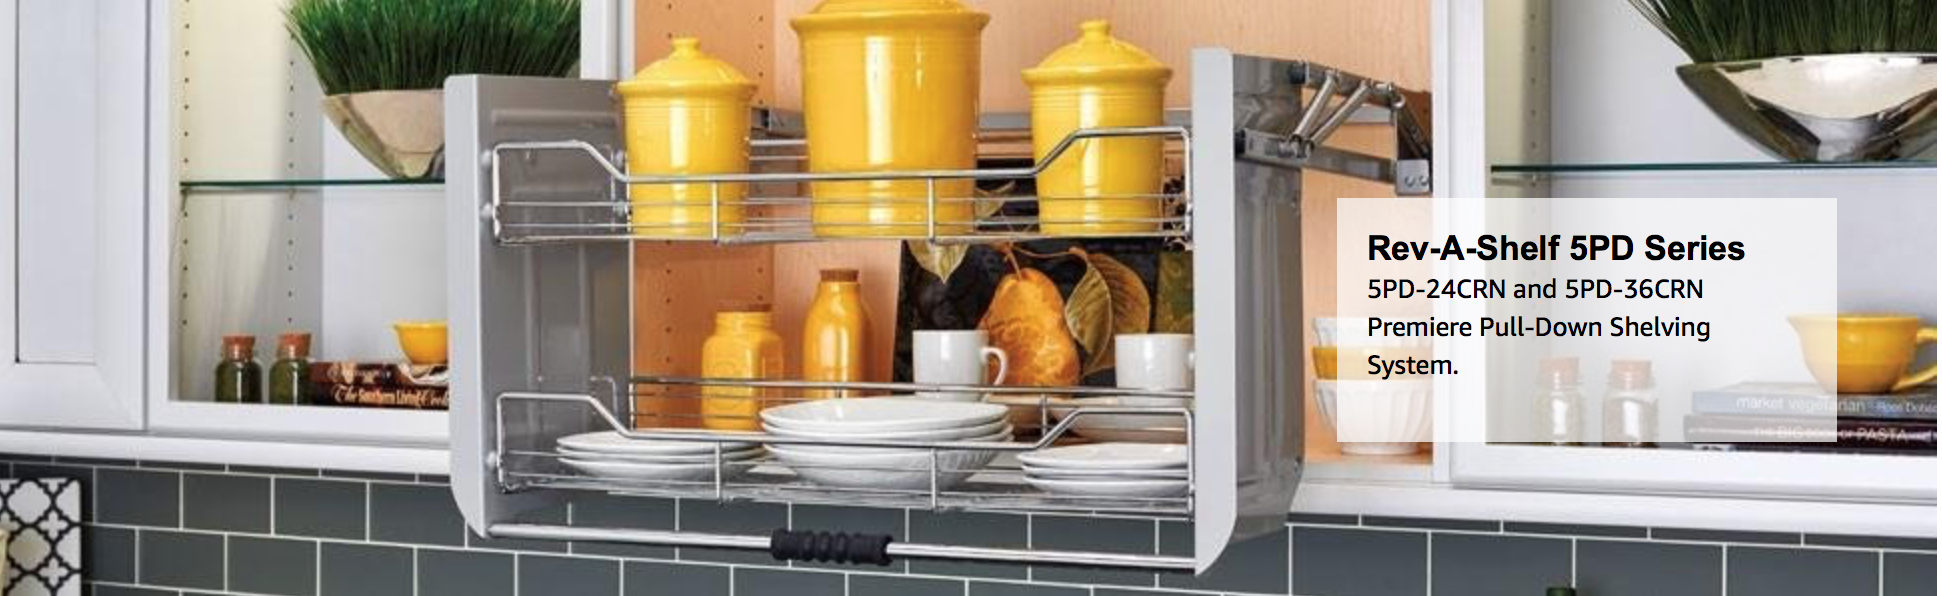 Rev-A-Shelf Small Wall Cabinet Pull-Down Shelving System 